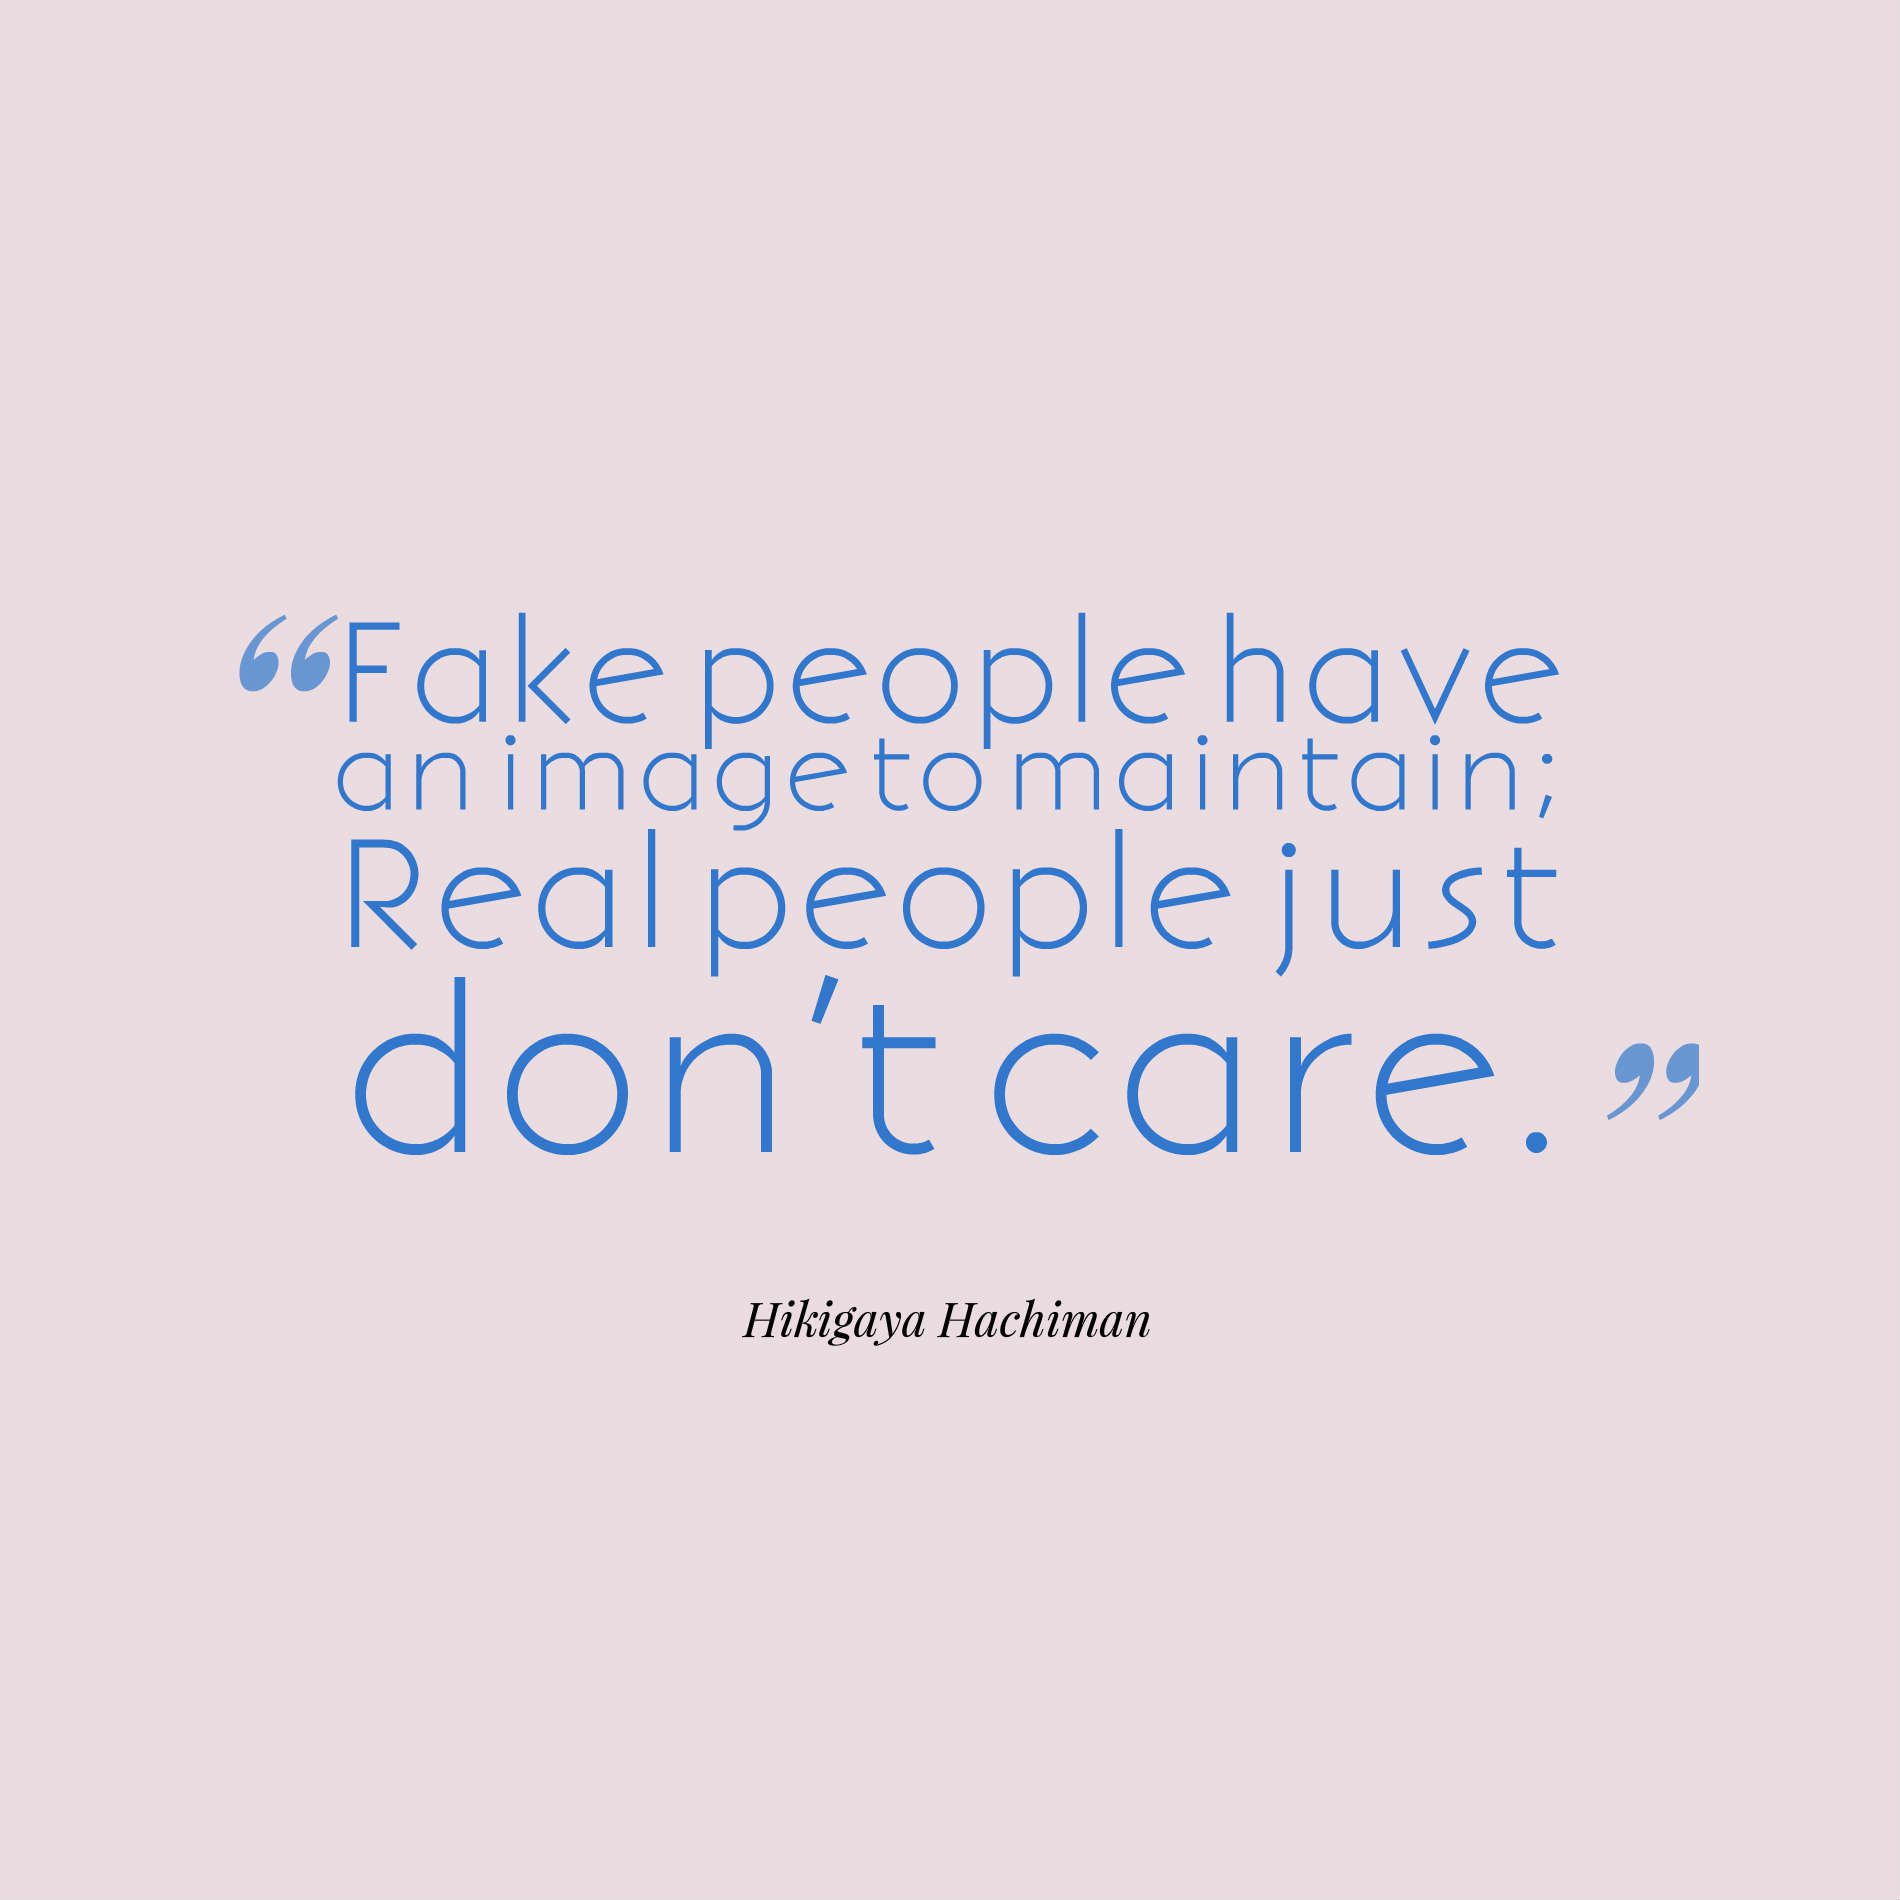 Fake people have an image to maintain; Real people just don’t care.